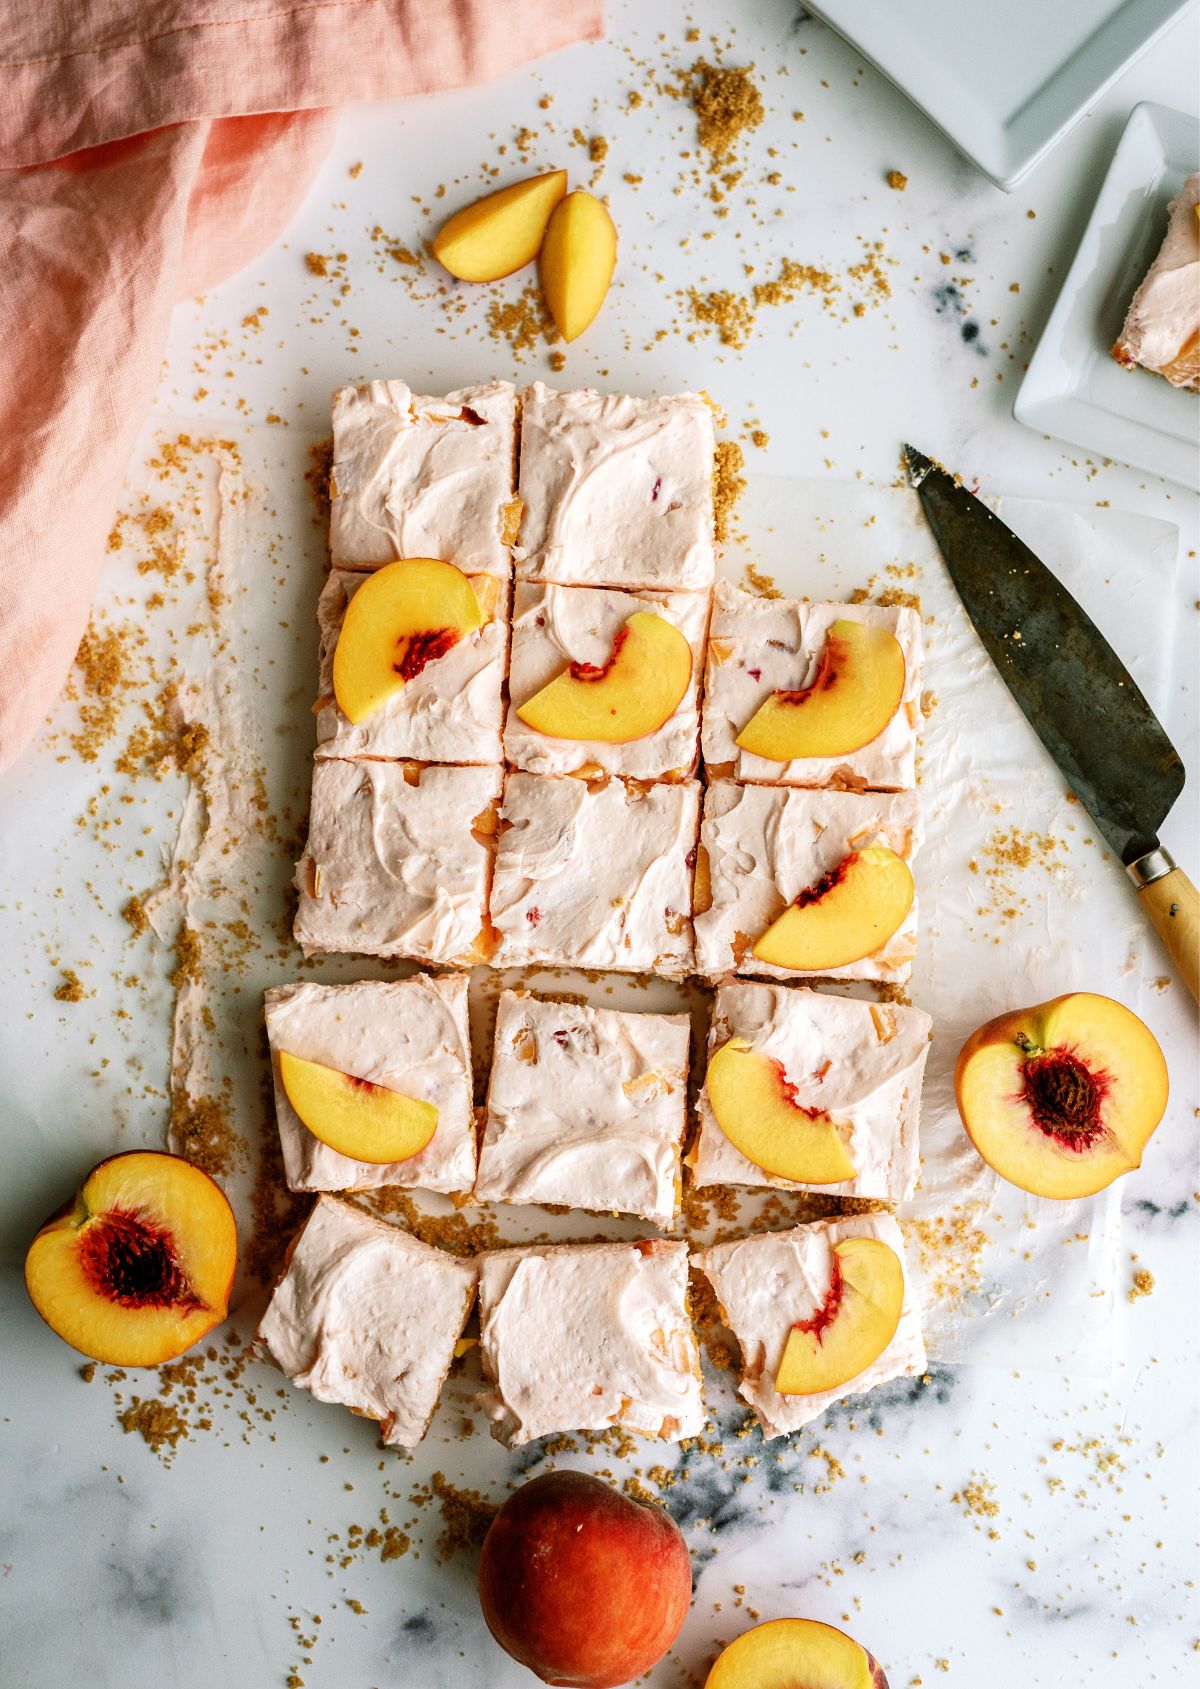 No-Bake Peach Cheesecake Bars cut into slices topped with fresh peaches